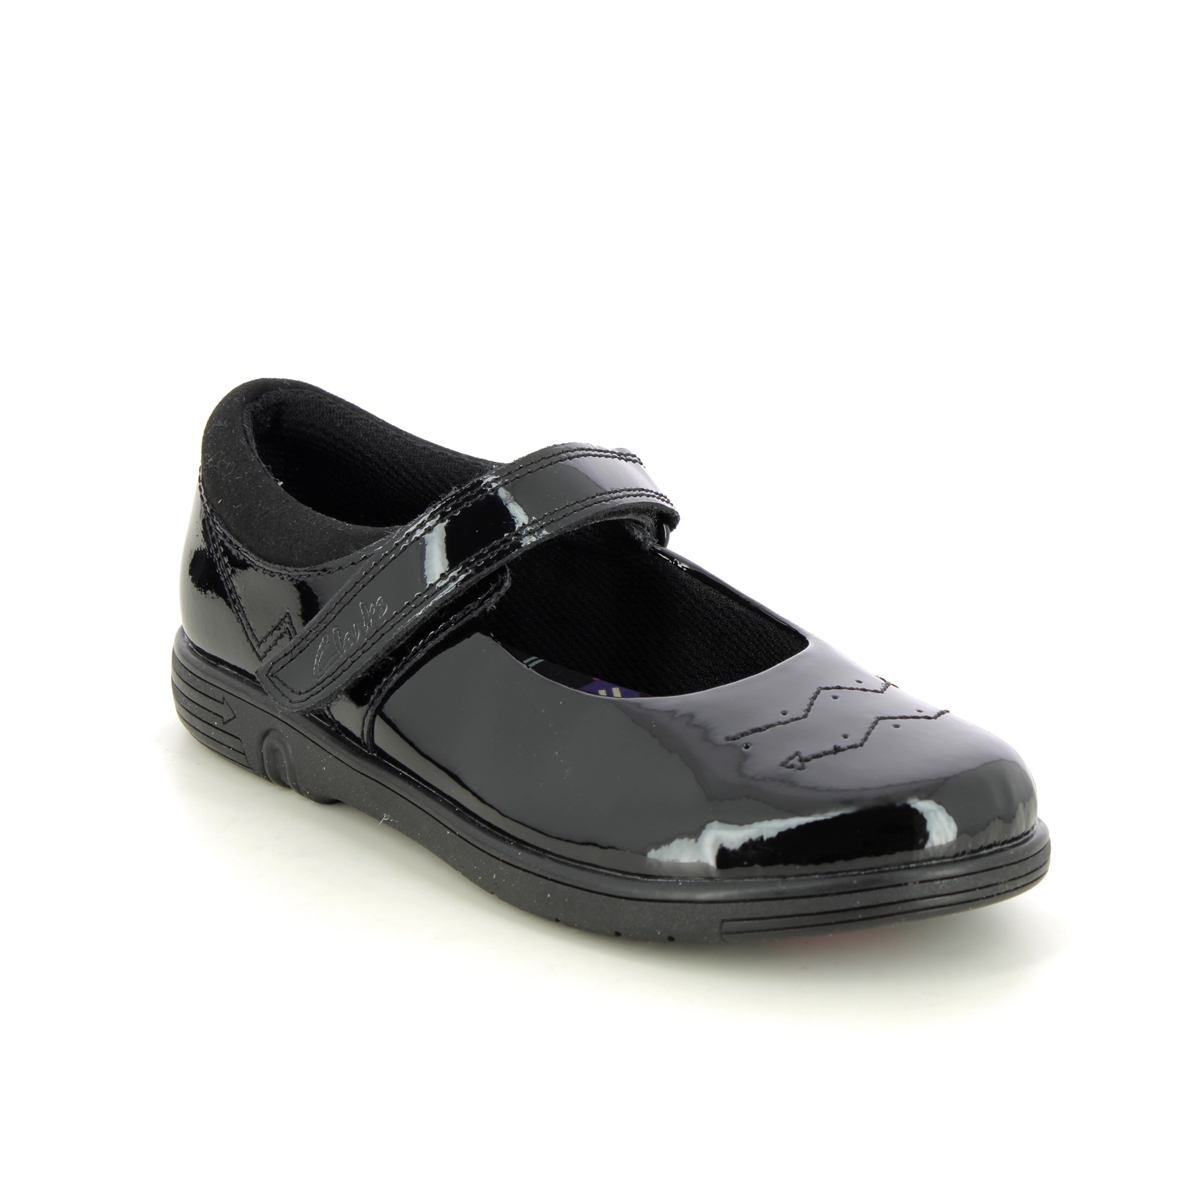 Clarks Jazzy Jig K Mary Jane Black Patent Kids Girls School Shoes 753087G In Size 13 In Plain Black Patent G Width Fitting For School For kids